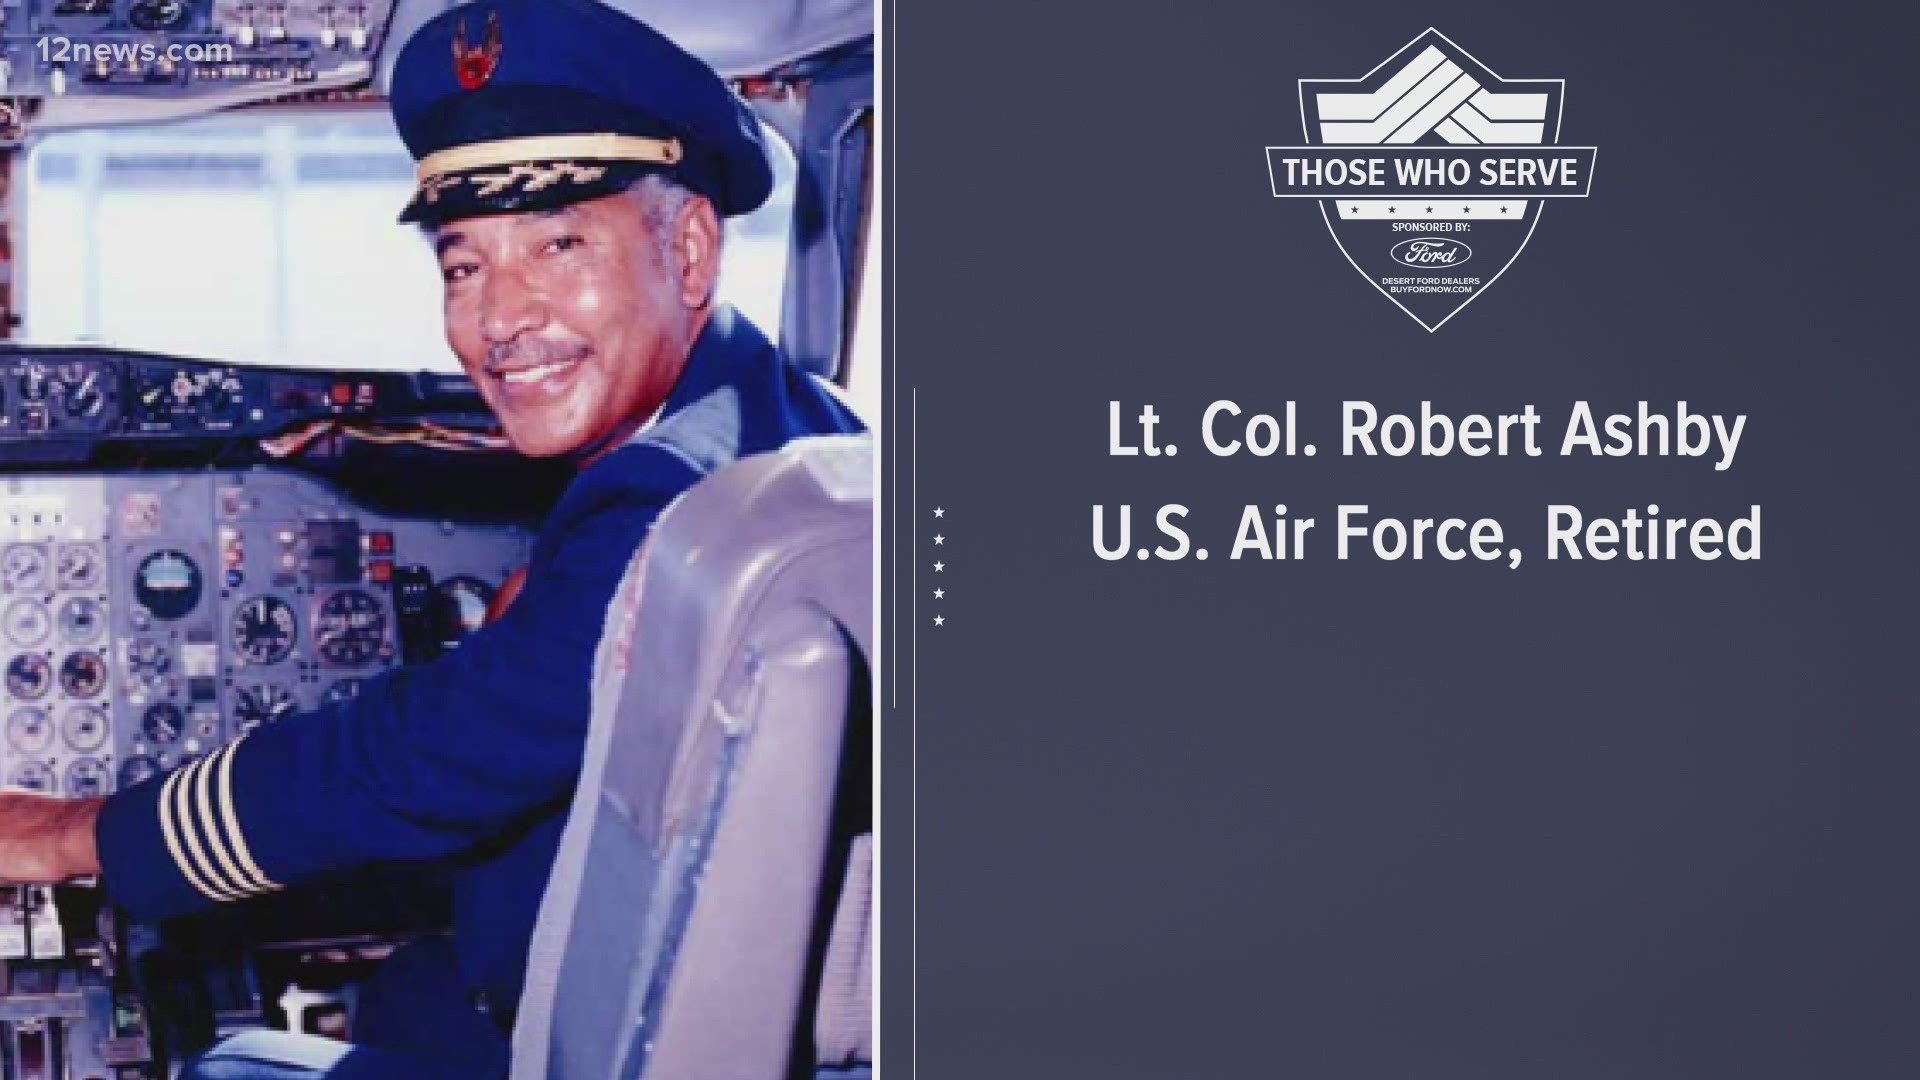 Robert Ashby retired from the Air Force in 1965 as Lieutenant Colonel after 21 years of service. He went on to become the first African American hired by Frontier.